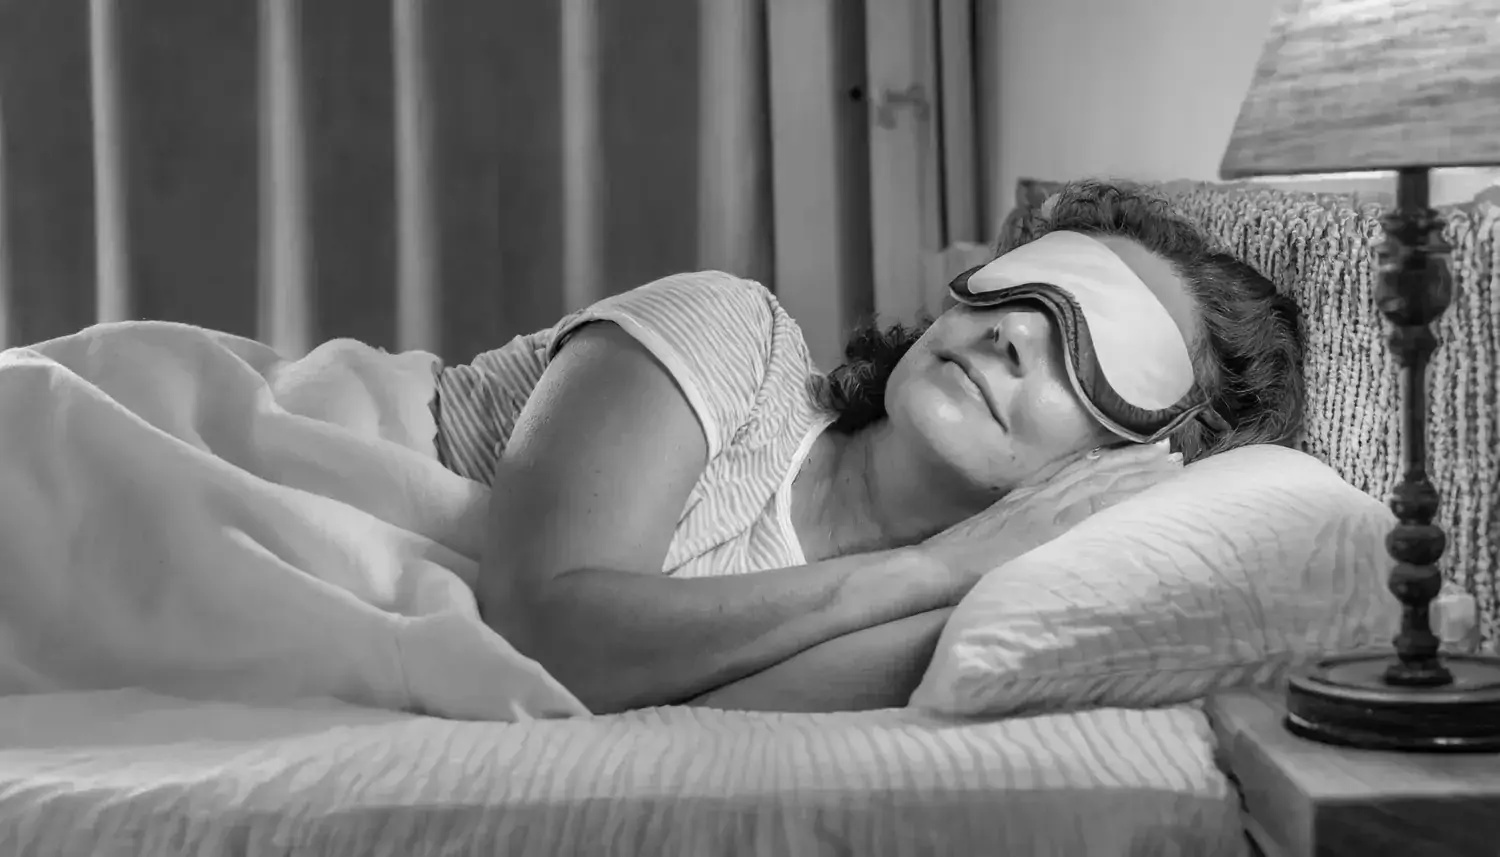 Sleeping midle aged woman with sleeping mask over her eyes.